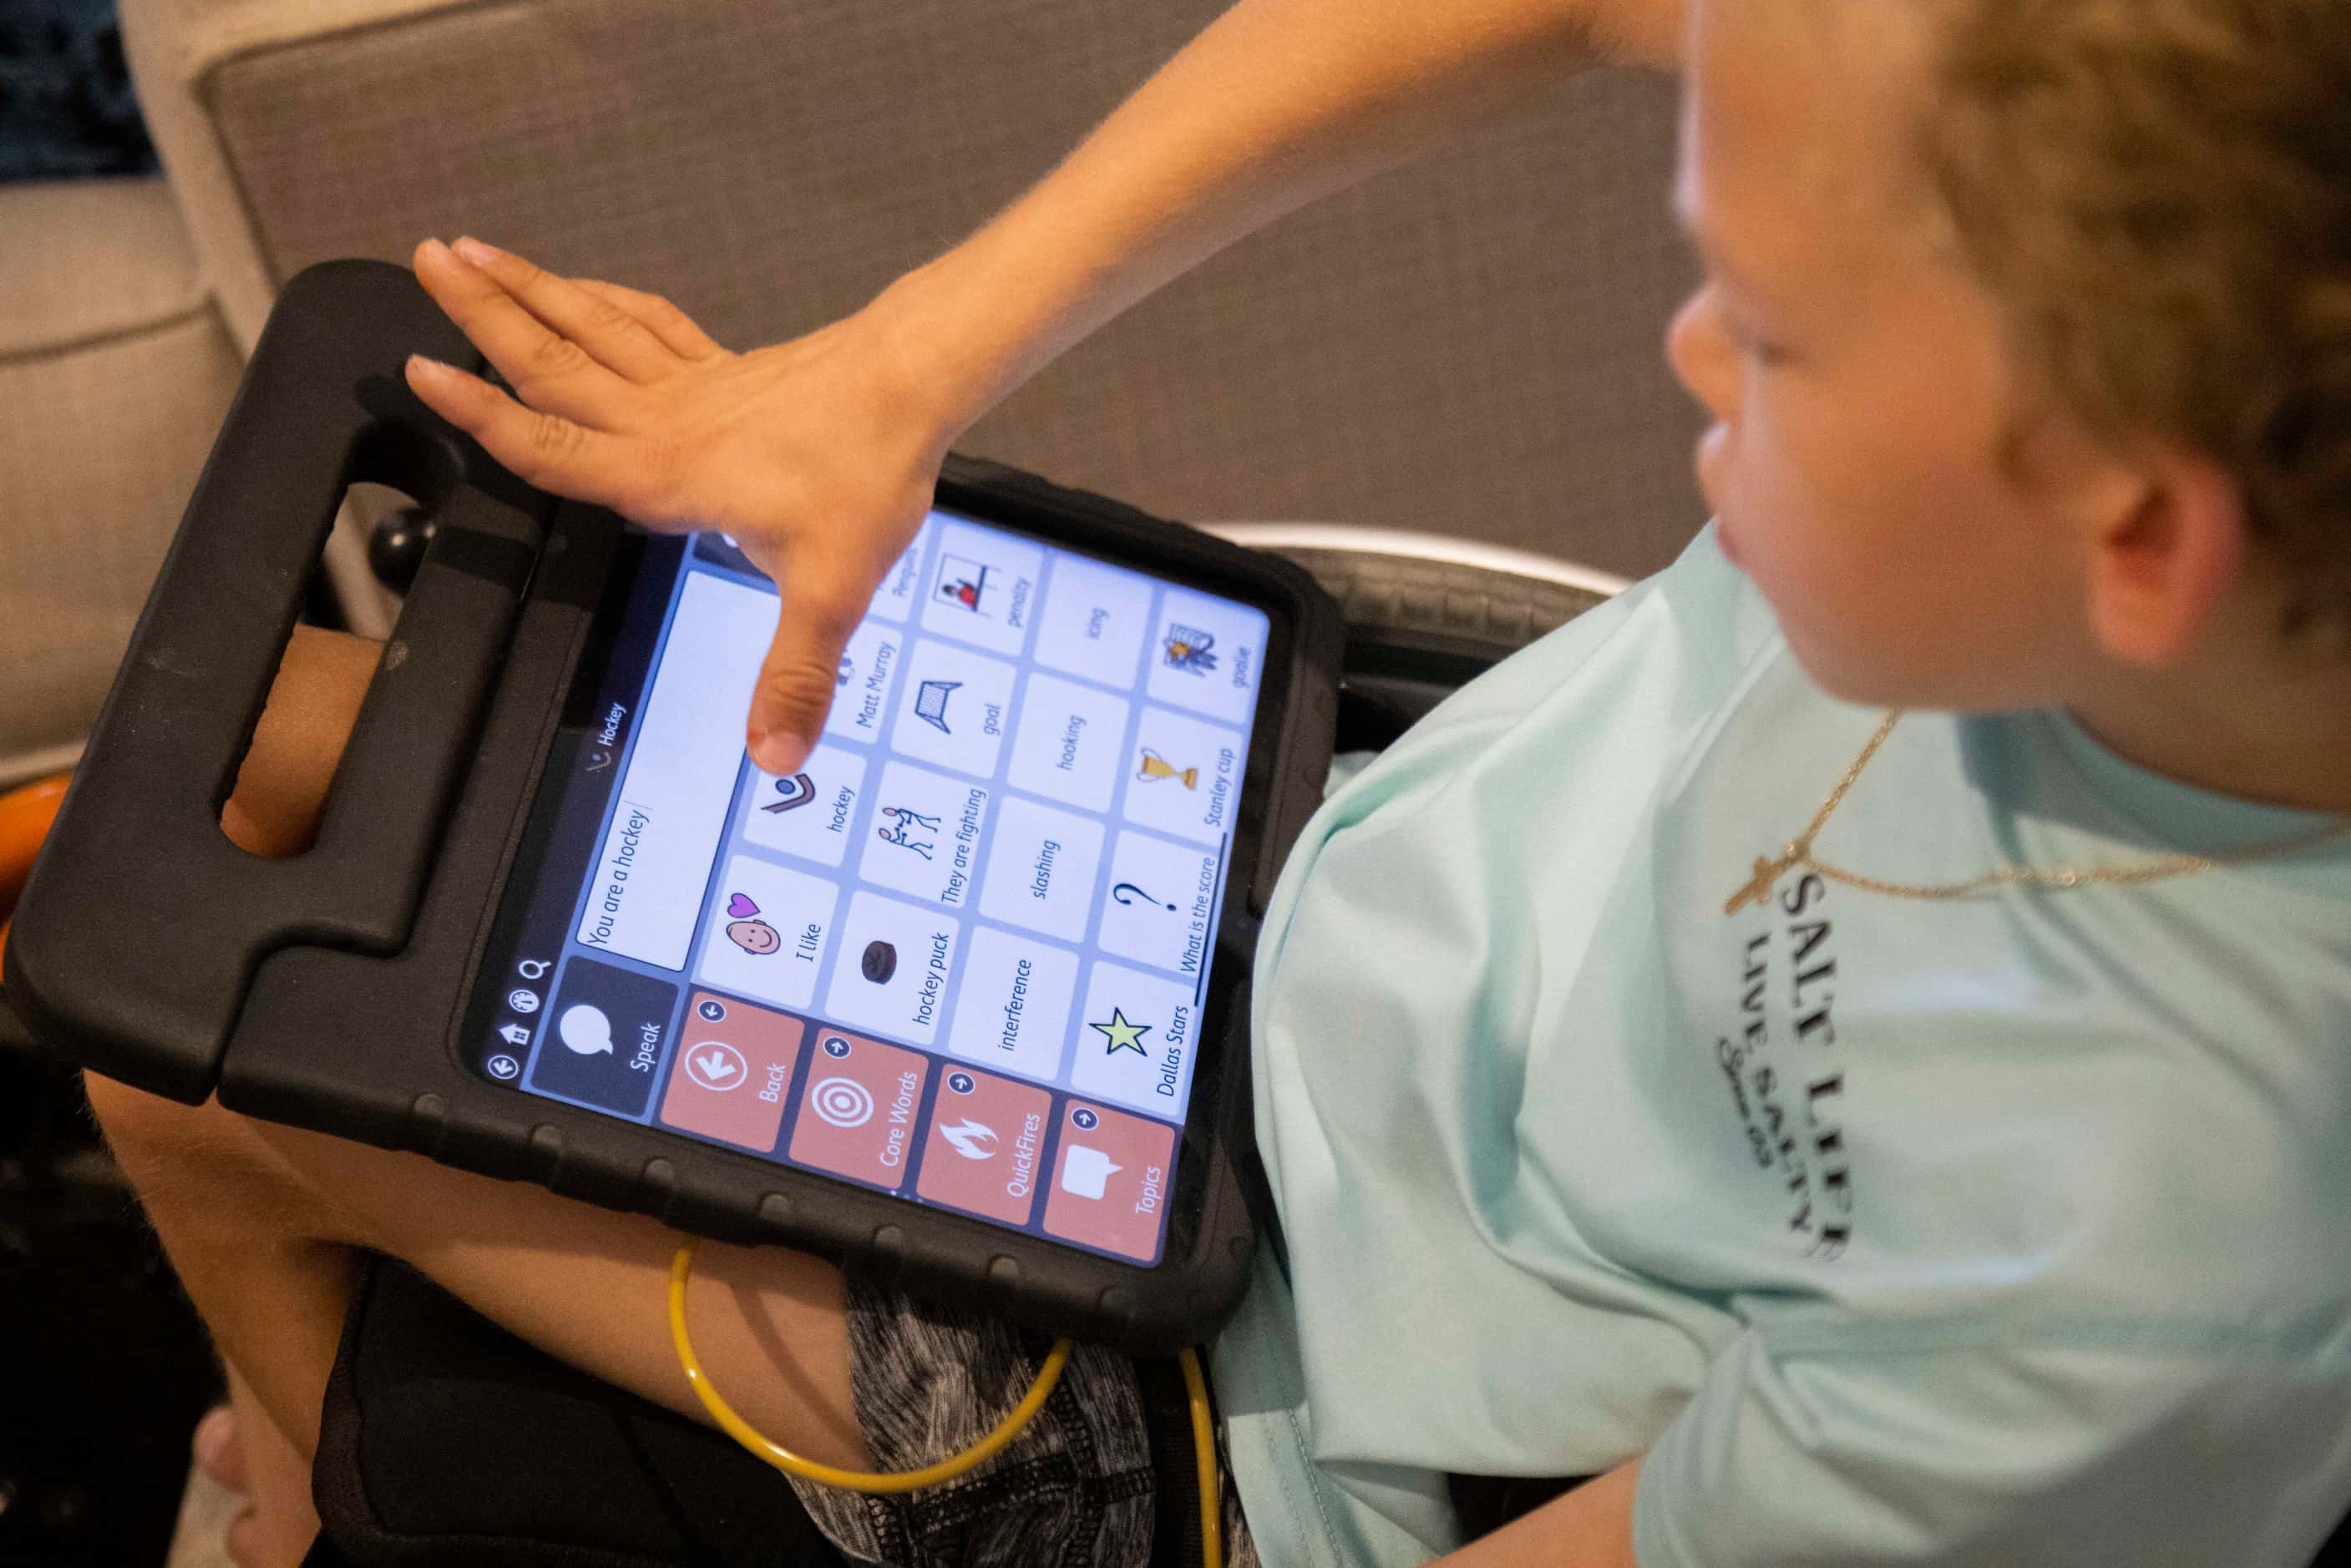 Will Woleben, 11, uses his iPad to write the sentence “You are a hockey player” during his...